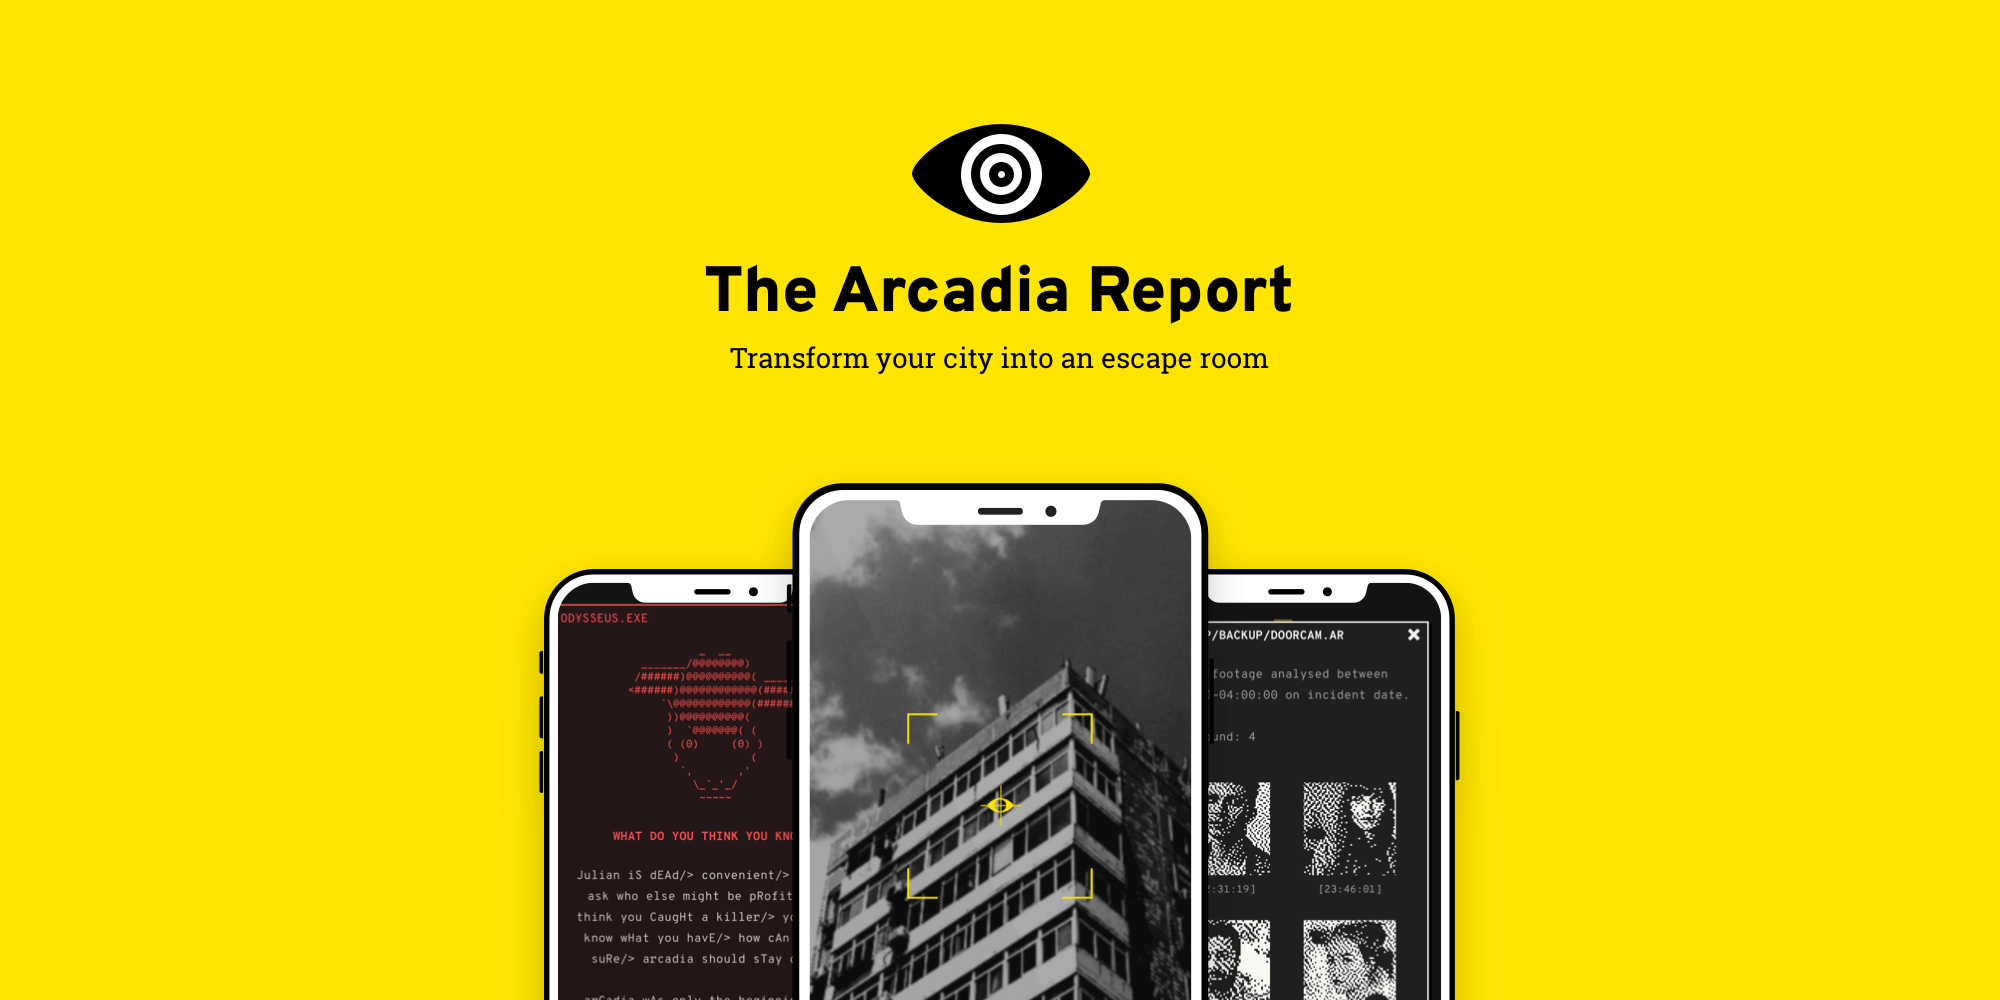 Three phones under The Arcadia's Report eye, showing a corrupted computer interface.